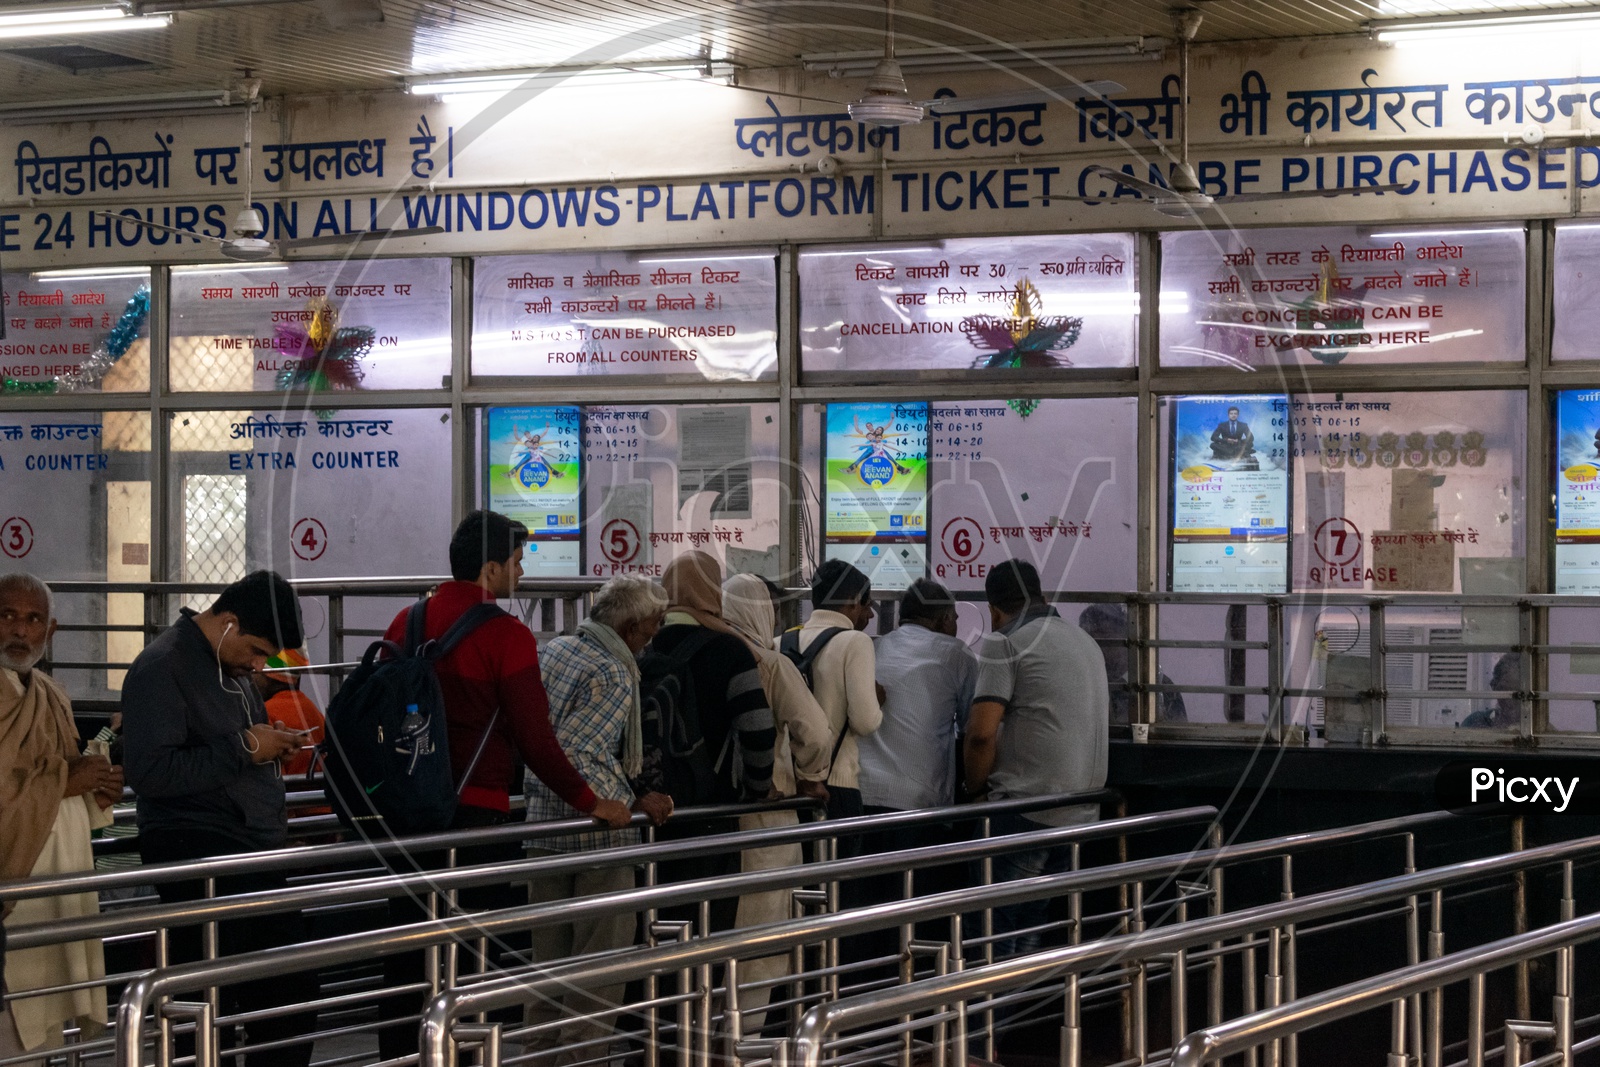 People at the windows for railway ticket booking